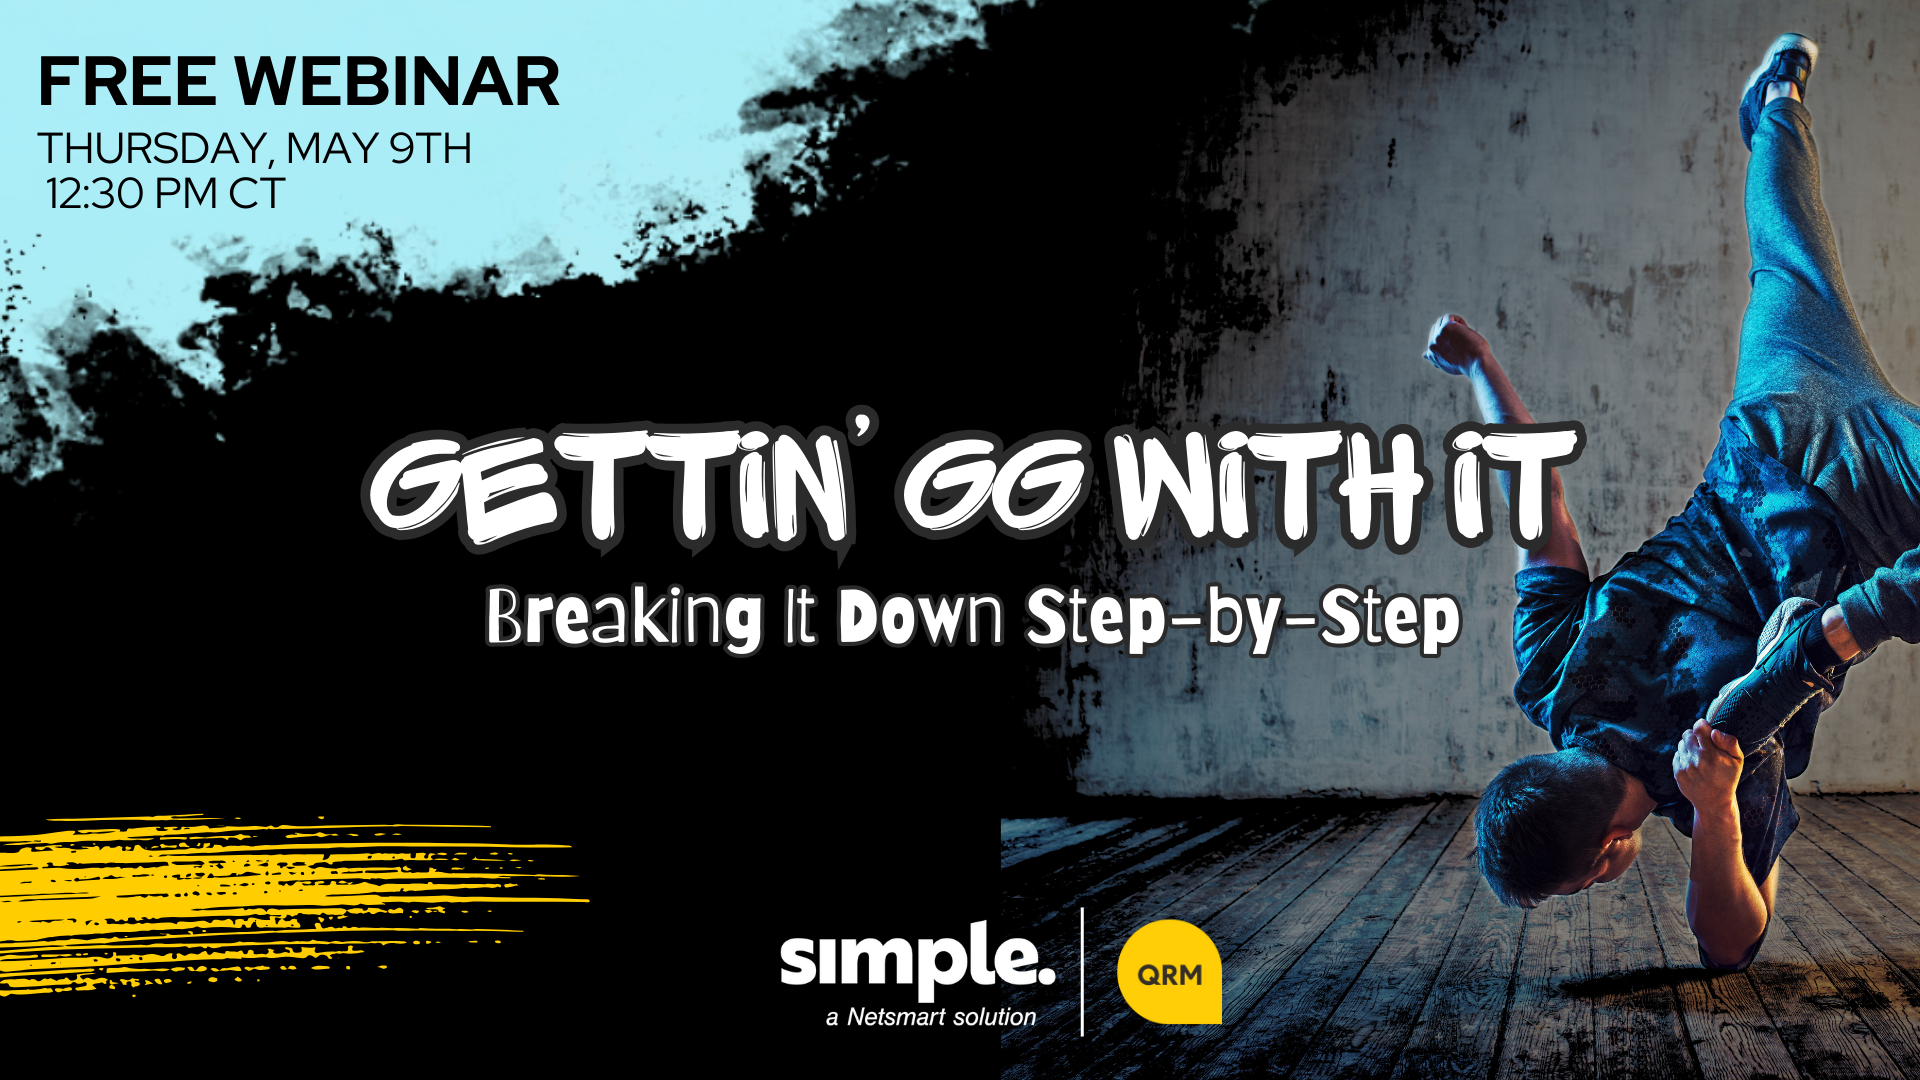 Featured image for “[On-demand] Gettin’ GG With It: Breaking It Down Step-by-Step”